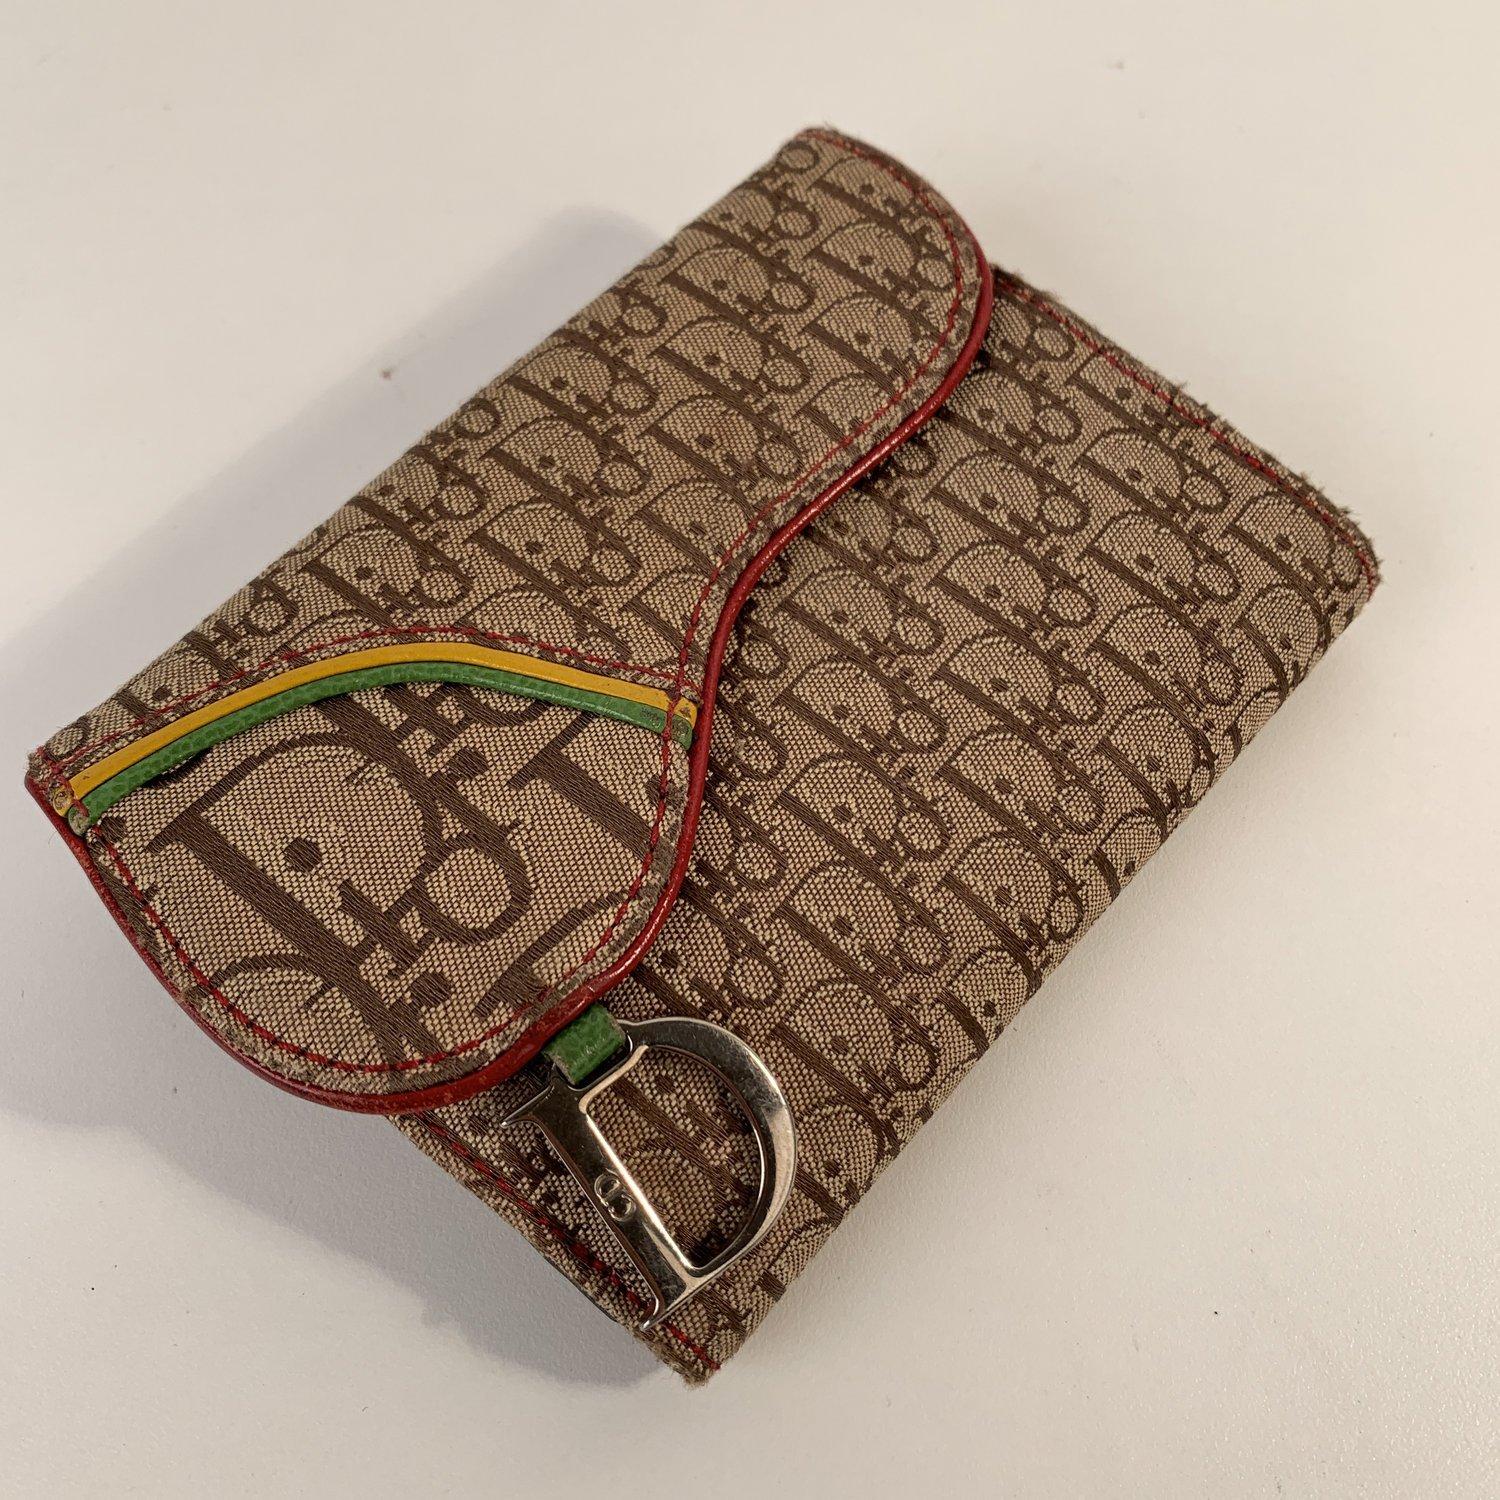 MATERIAL: Canvas, Leather COLOR: Beige MODEL: Wallet GENDER: Women SIZE: Small Condition B :GOOD CONDITION - Some light wear of use - some wear of use on leather trim and on corners. Measurements HEIGHT: 4 inches - 10,2 cm LENGTH: 5 inches - 12,7 cm